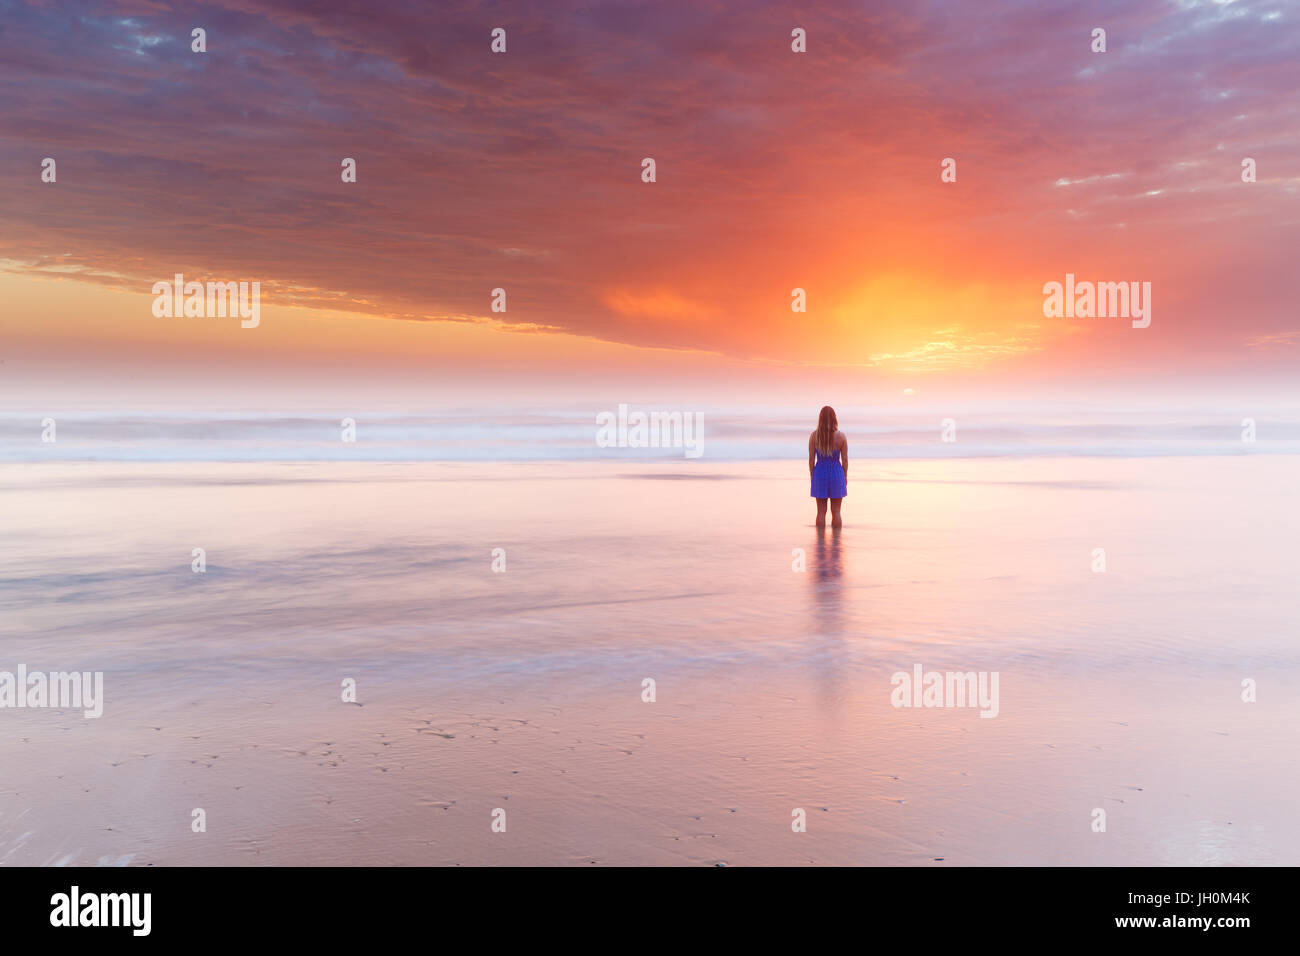 A silhouetted woman watches a beautiful sunrise over the ocean on Australia. Stock Photo